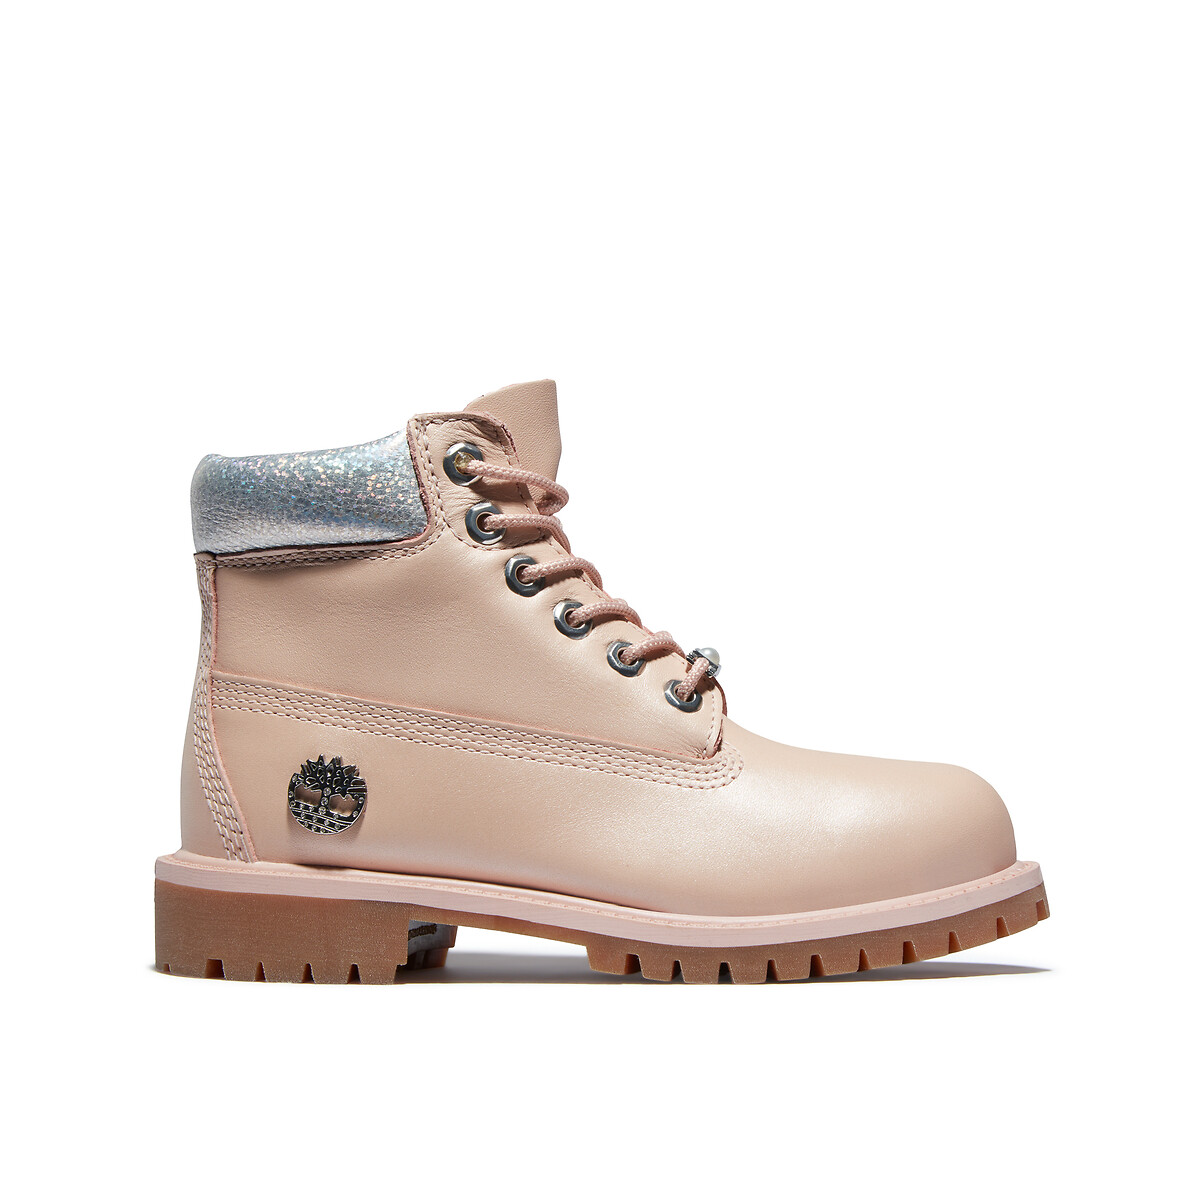 Bud arm panic Timberland Outlet | La Redoute